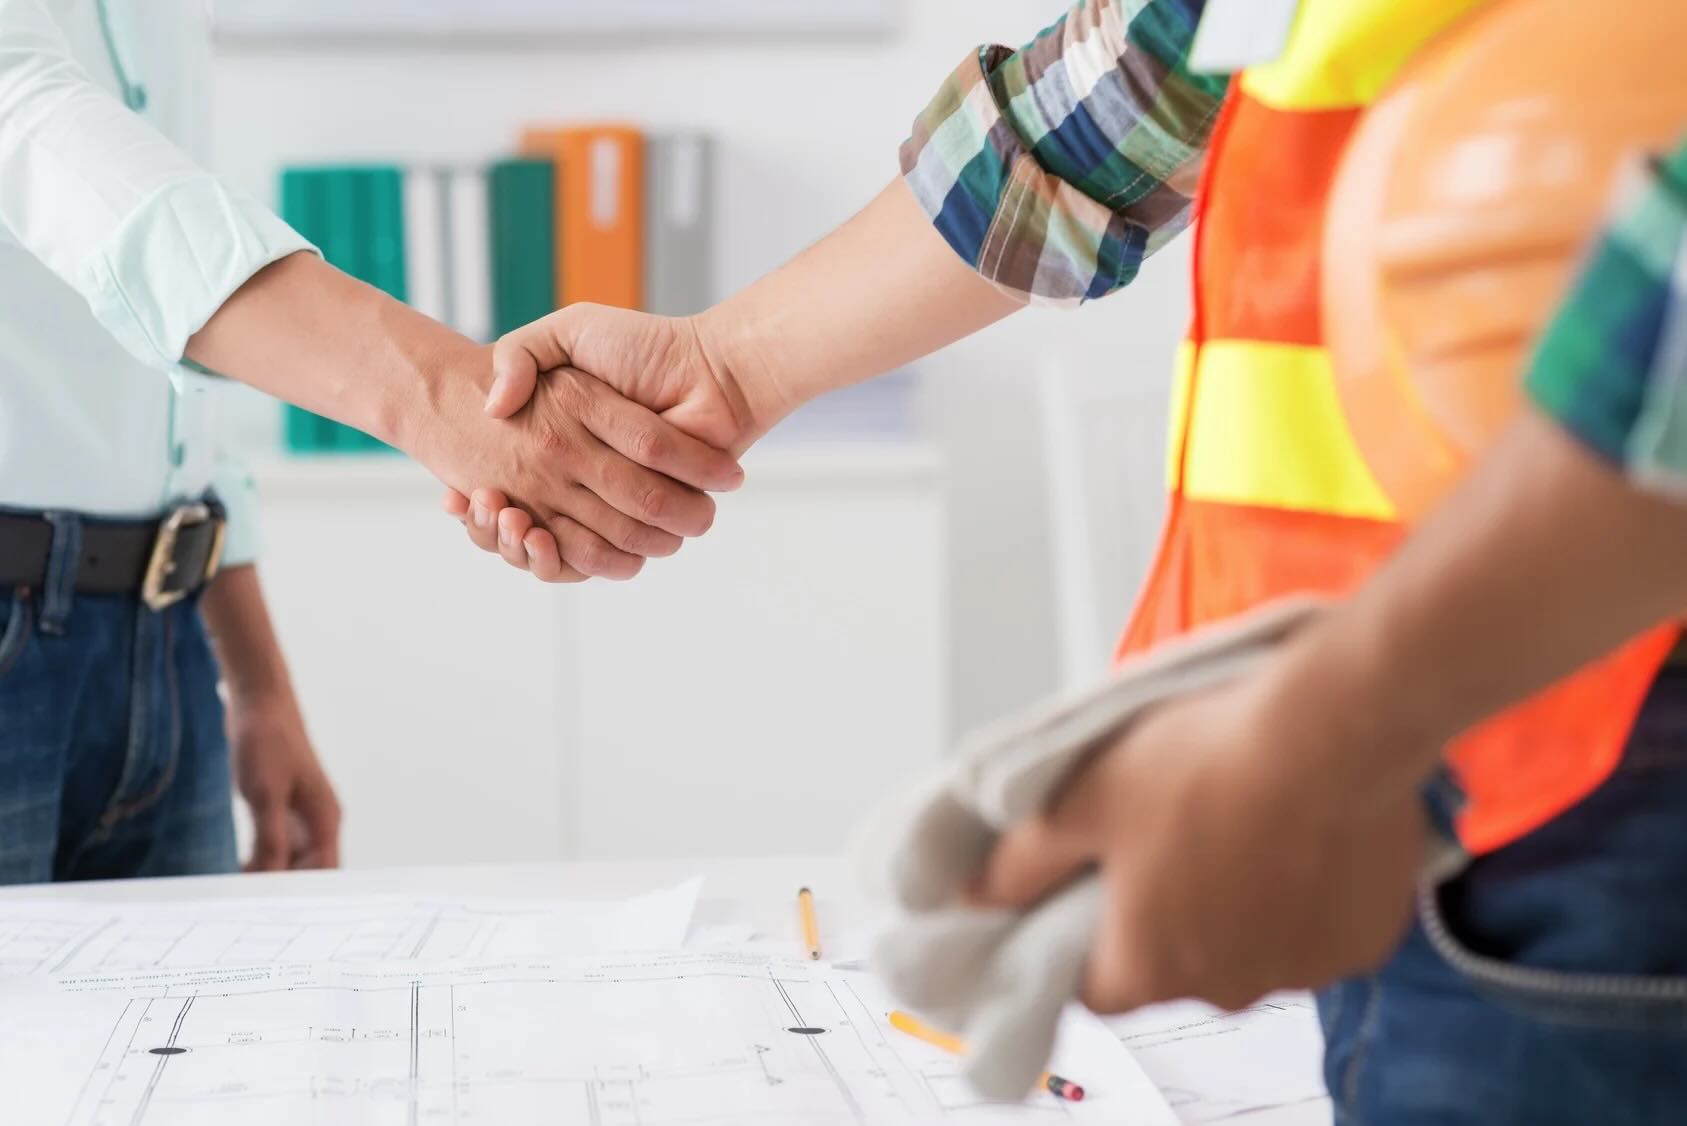 How To Subcontract Construction Work